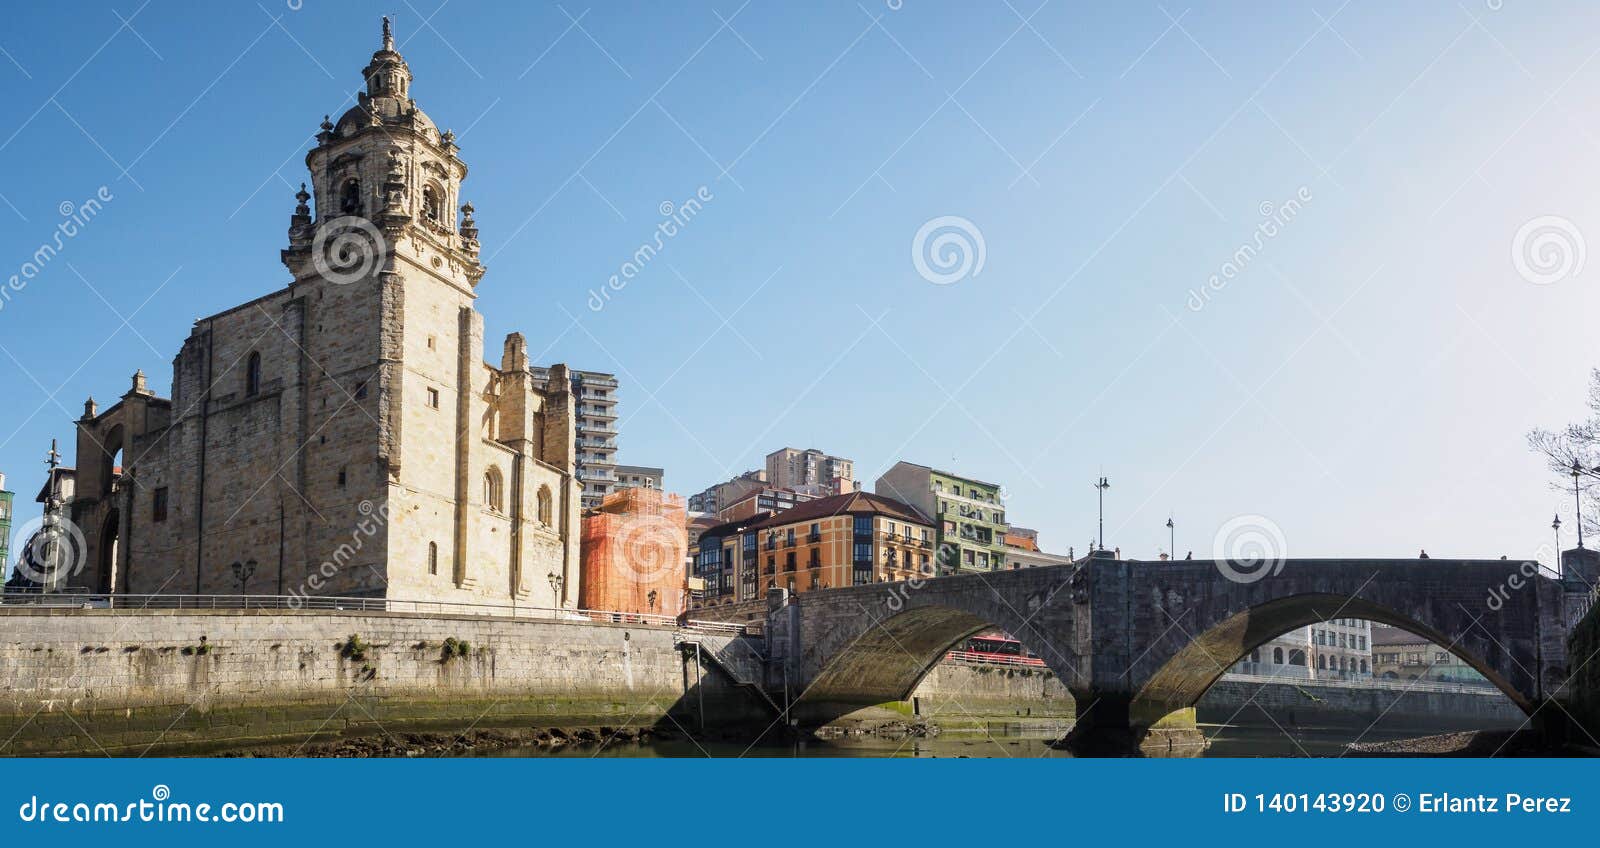 the ribera market and the church of san anton of bilbao seen from the river